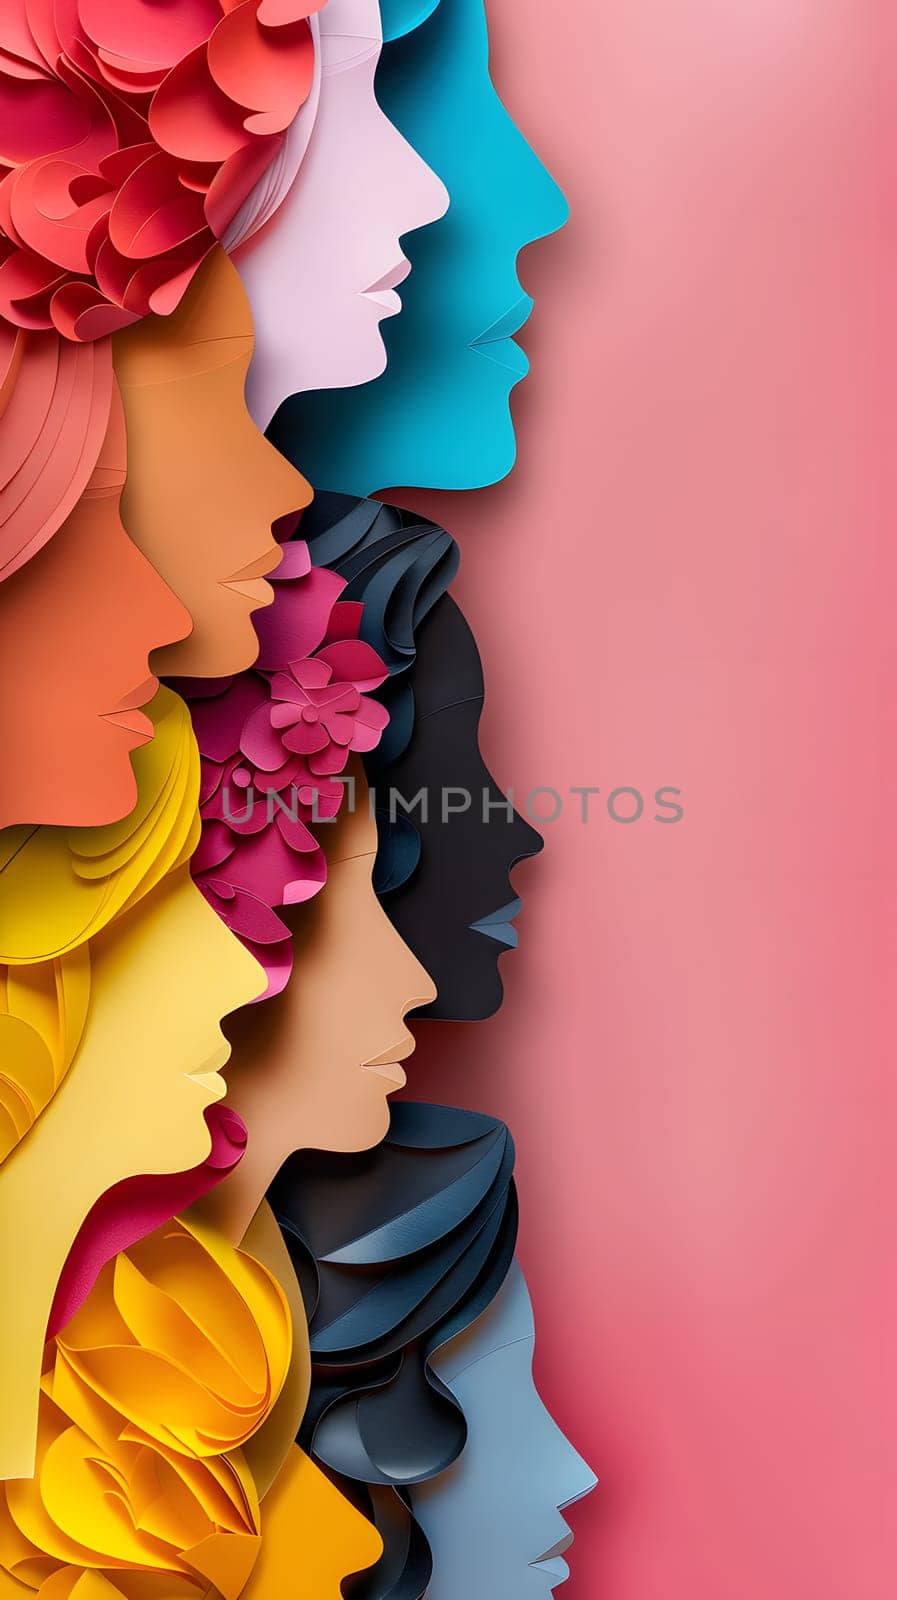 A row of colorful paper womens faces with Petal headgear, in shades of pink, magenta, and violet, each with a unique gesture, on a pink background